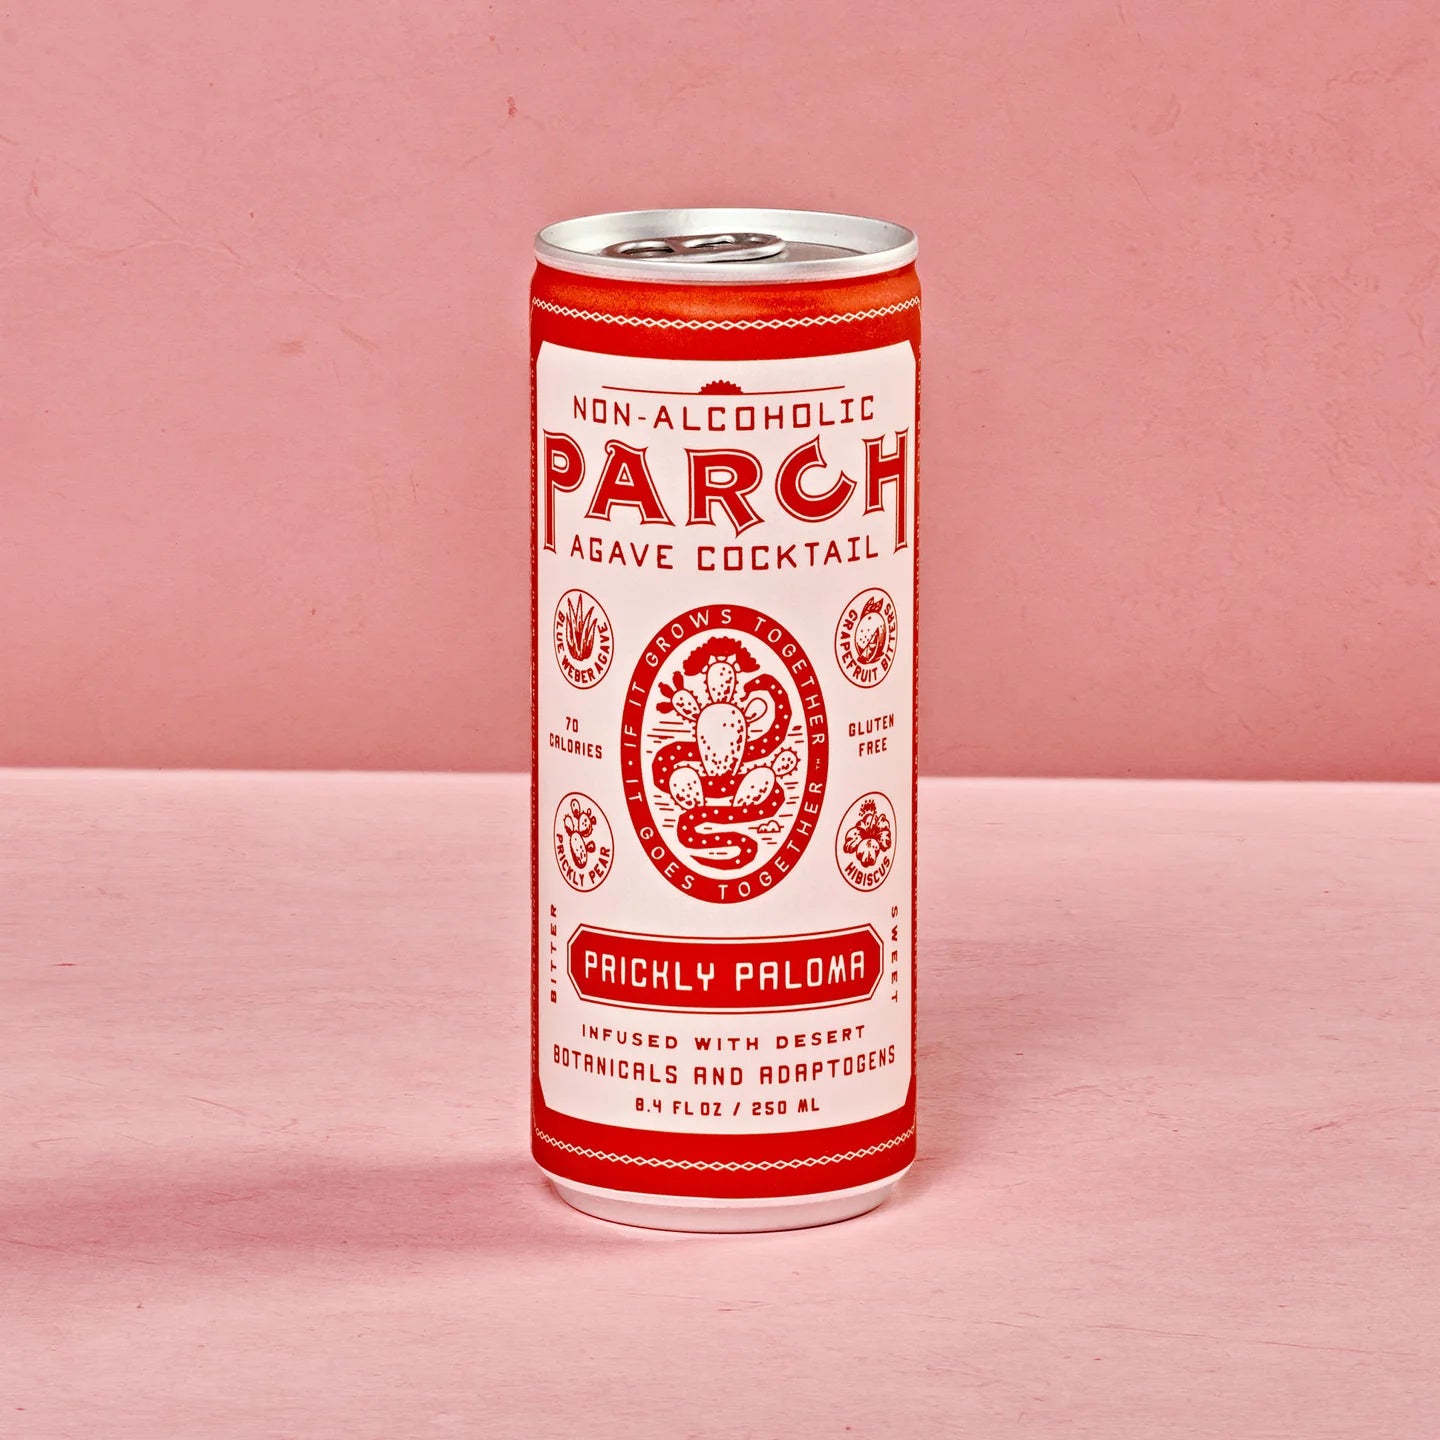 Non-Alcoholic Drinks: The Paloma Cocktail